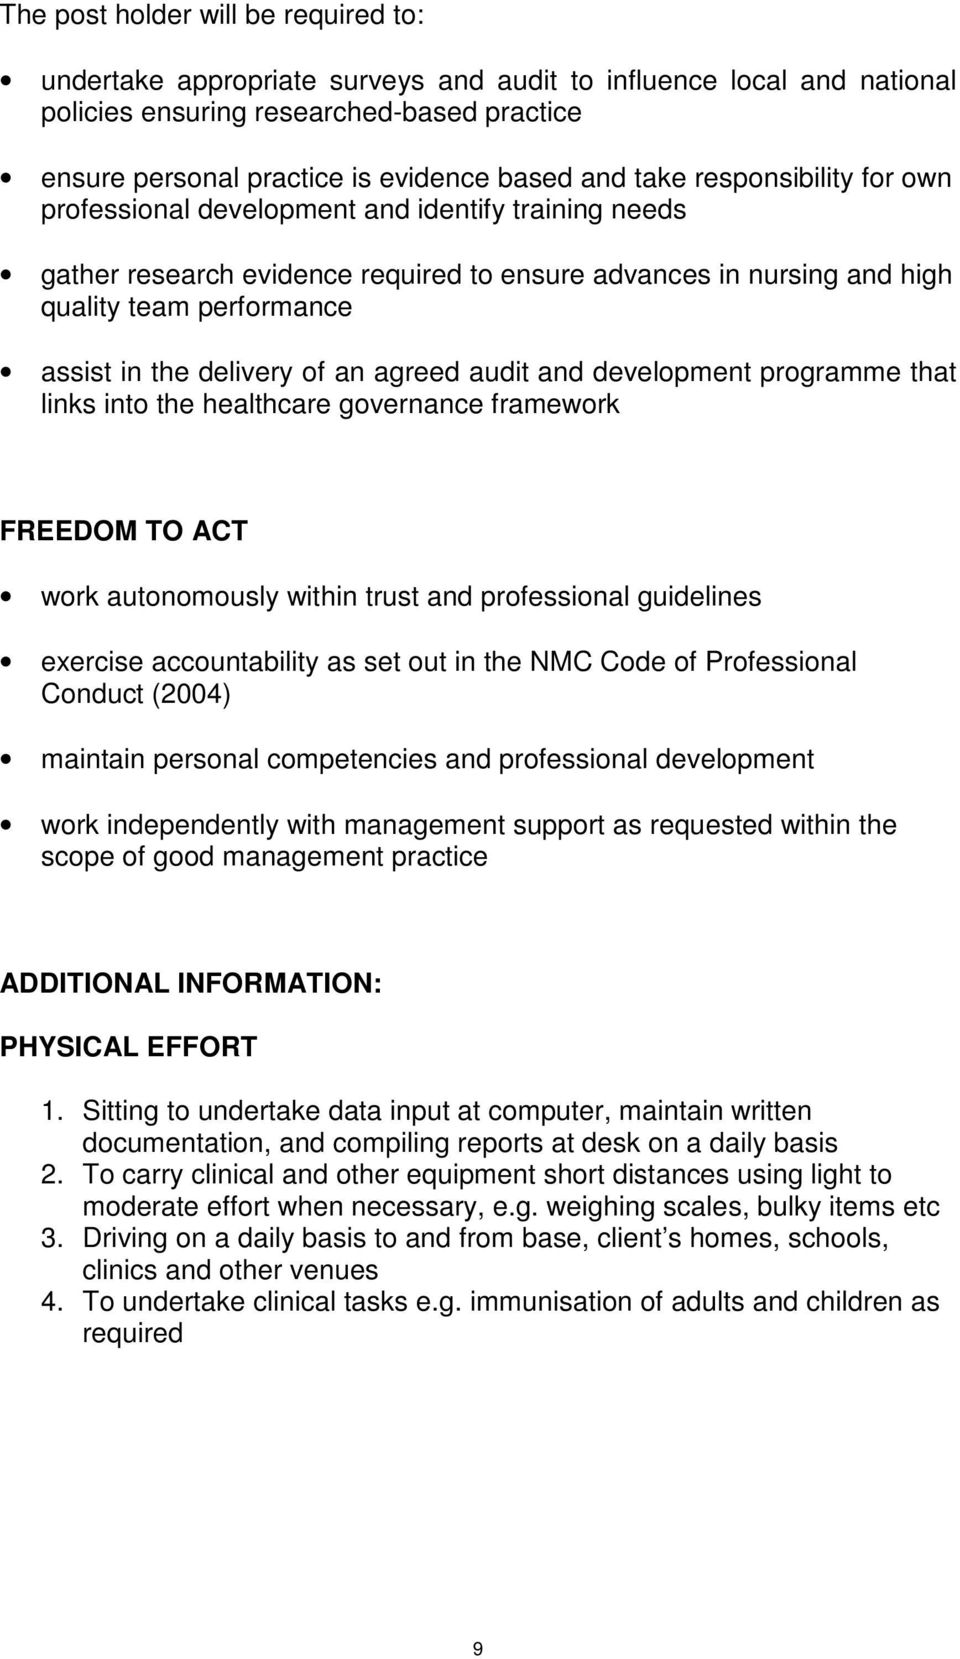 development programme that links into the healthcare governance framework FREEDOM TO ACT work autonomously within trust and professional guidelines exercise accountability as set out in the NMC Code